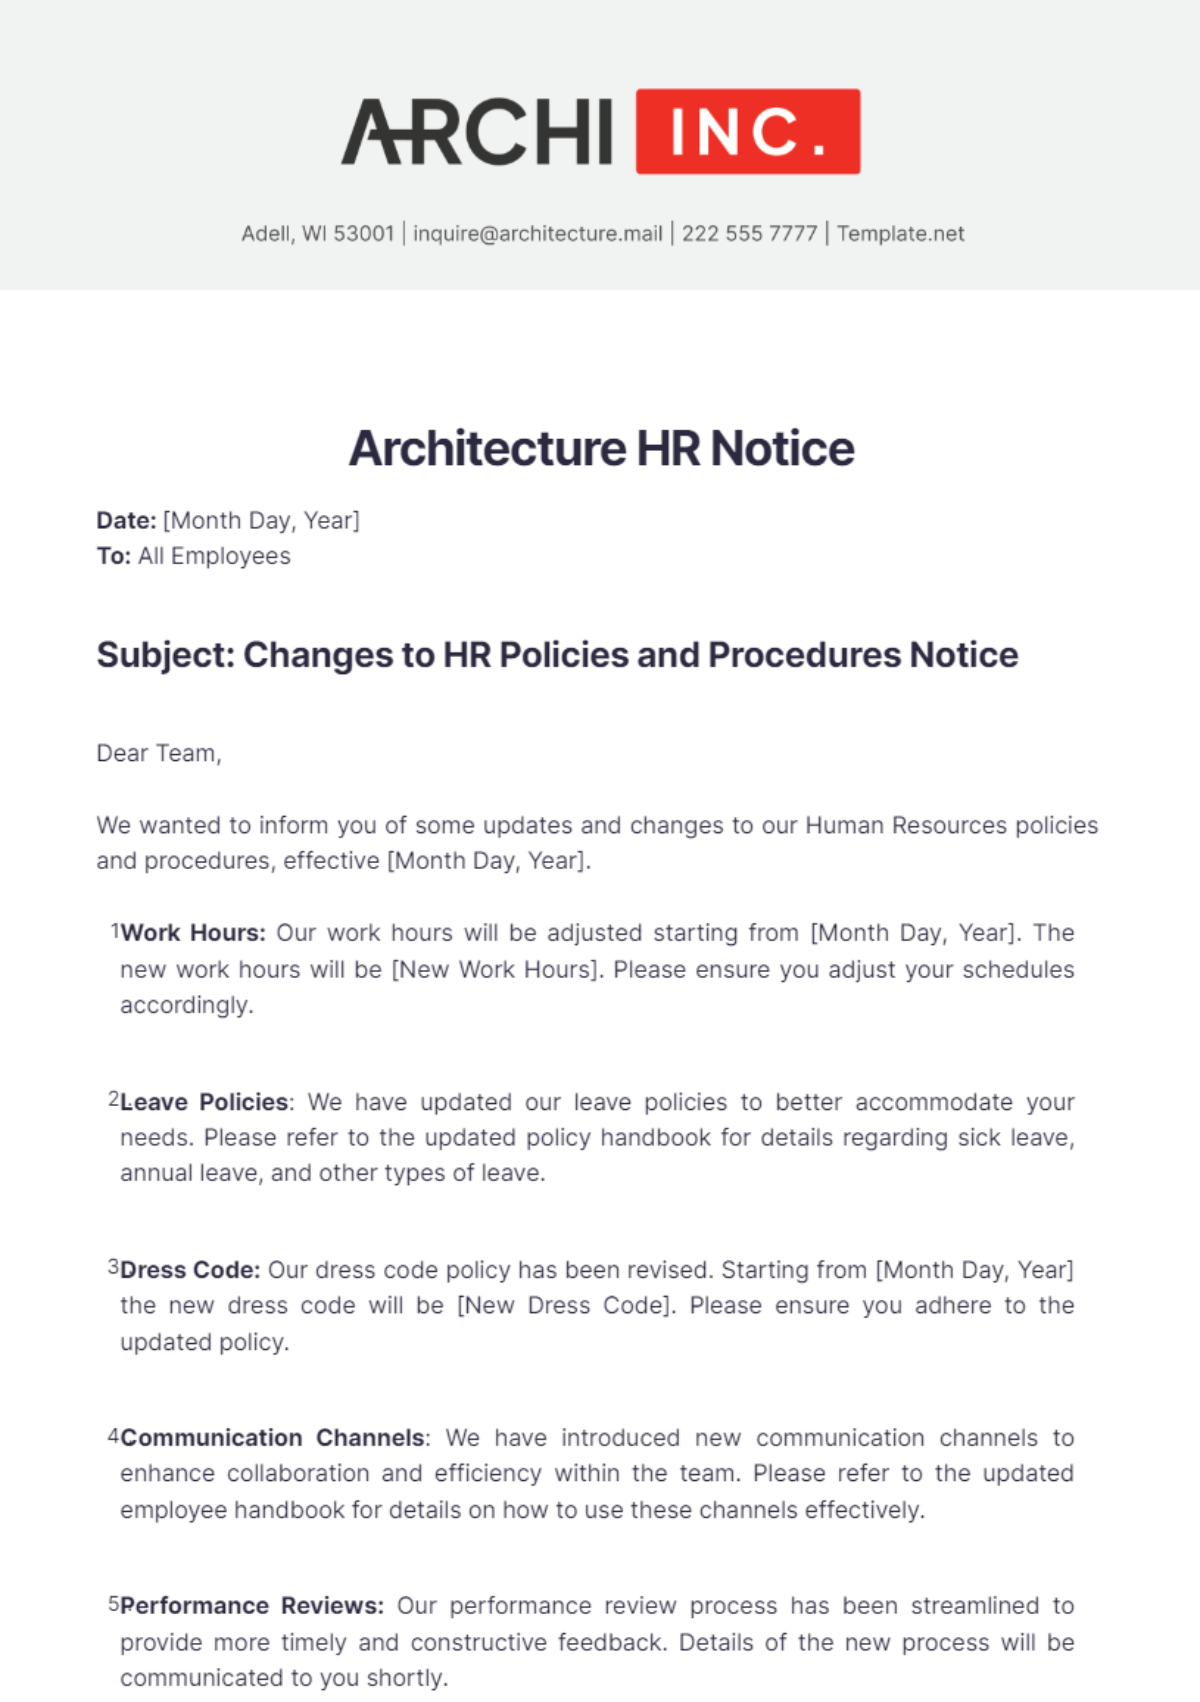 Free Architecture HR Notice Template